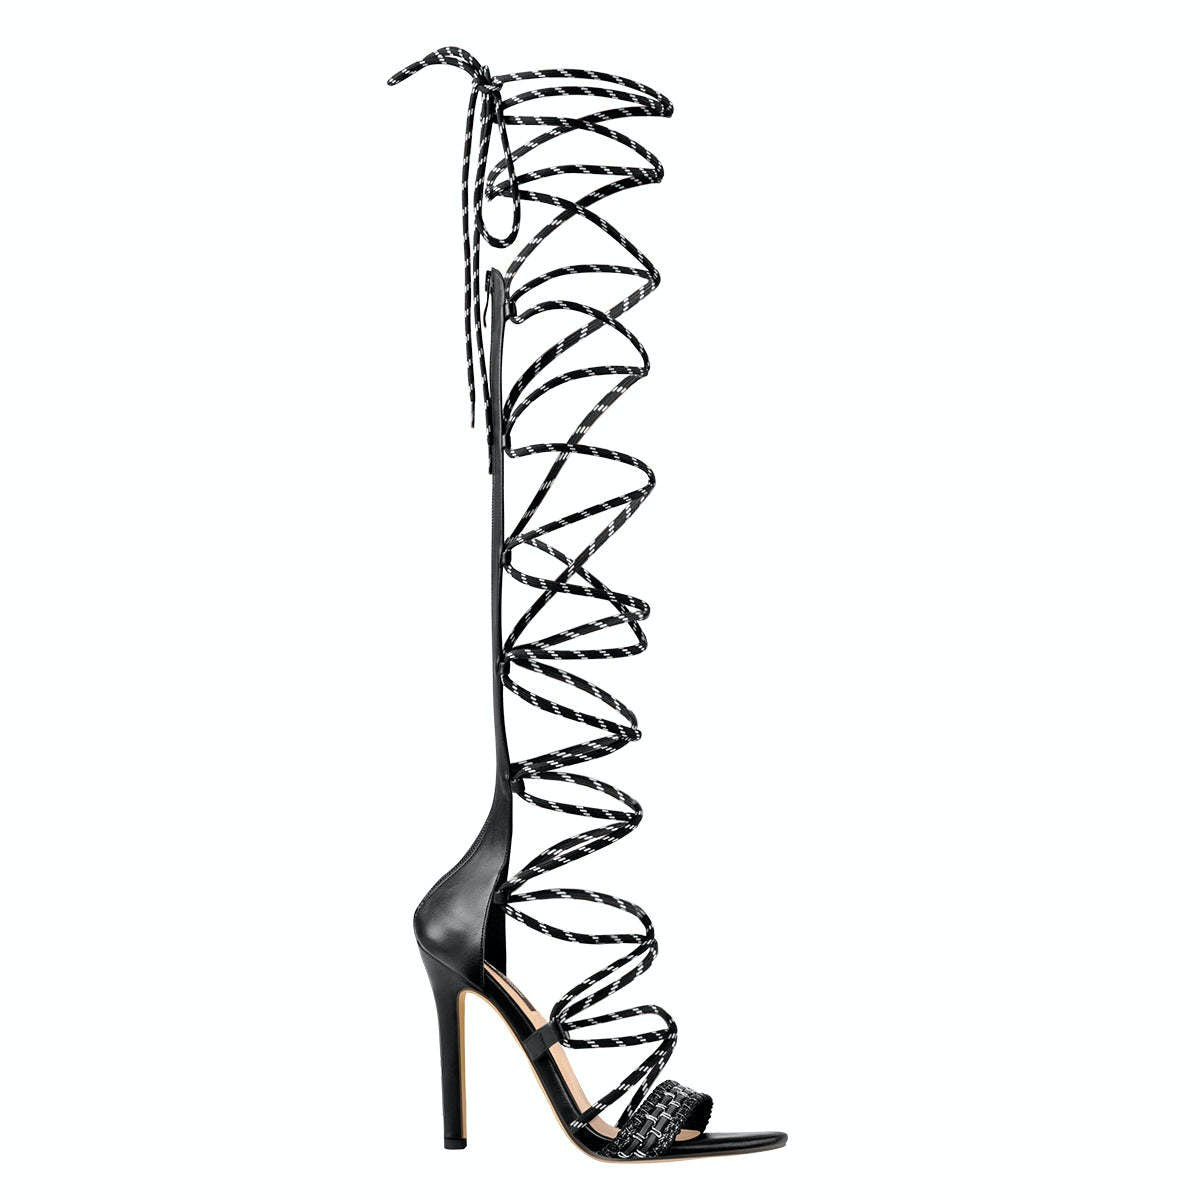 Strappy Lace Up Mid Calf Knee High Gladiator Stiletto Heel Pumps Sandals  G31 | eBay